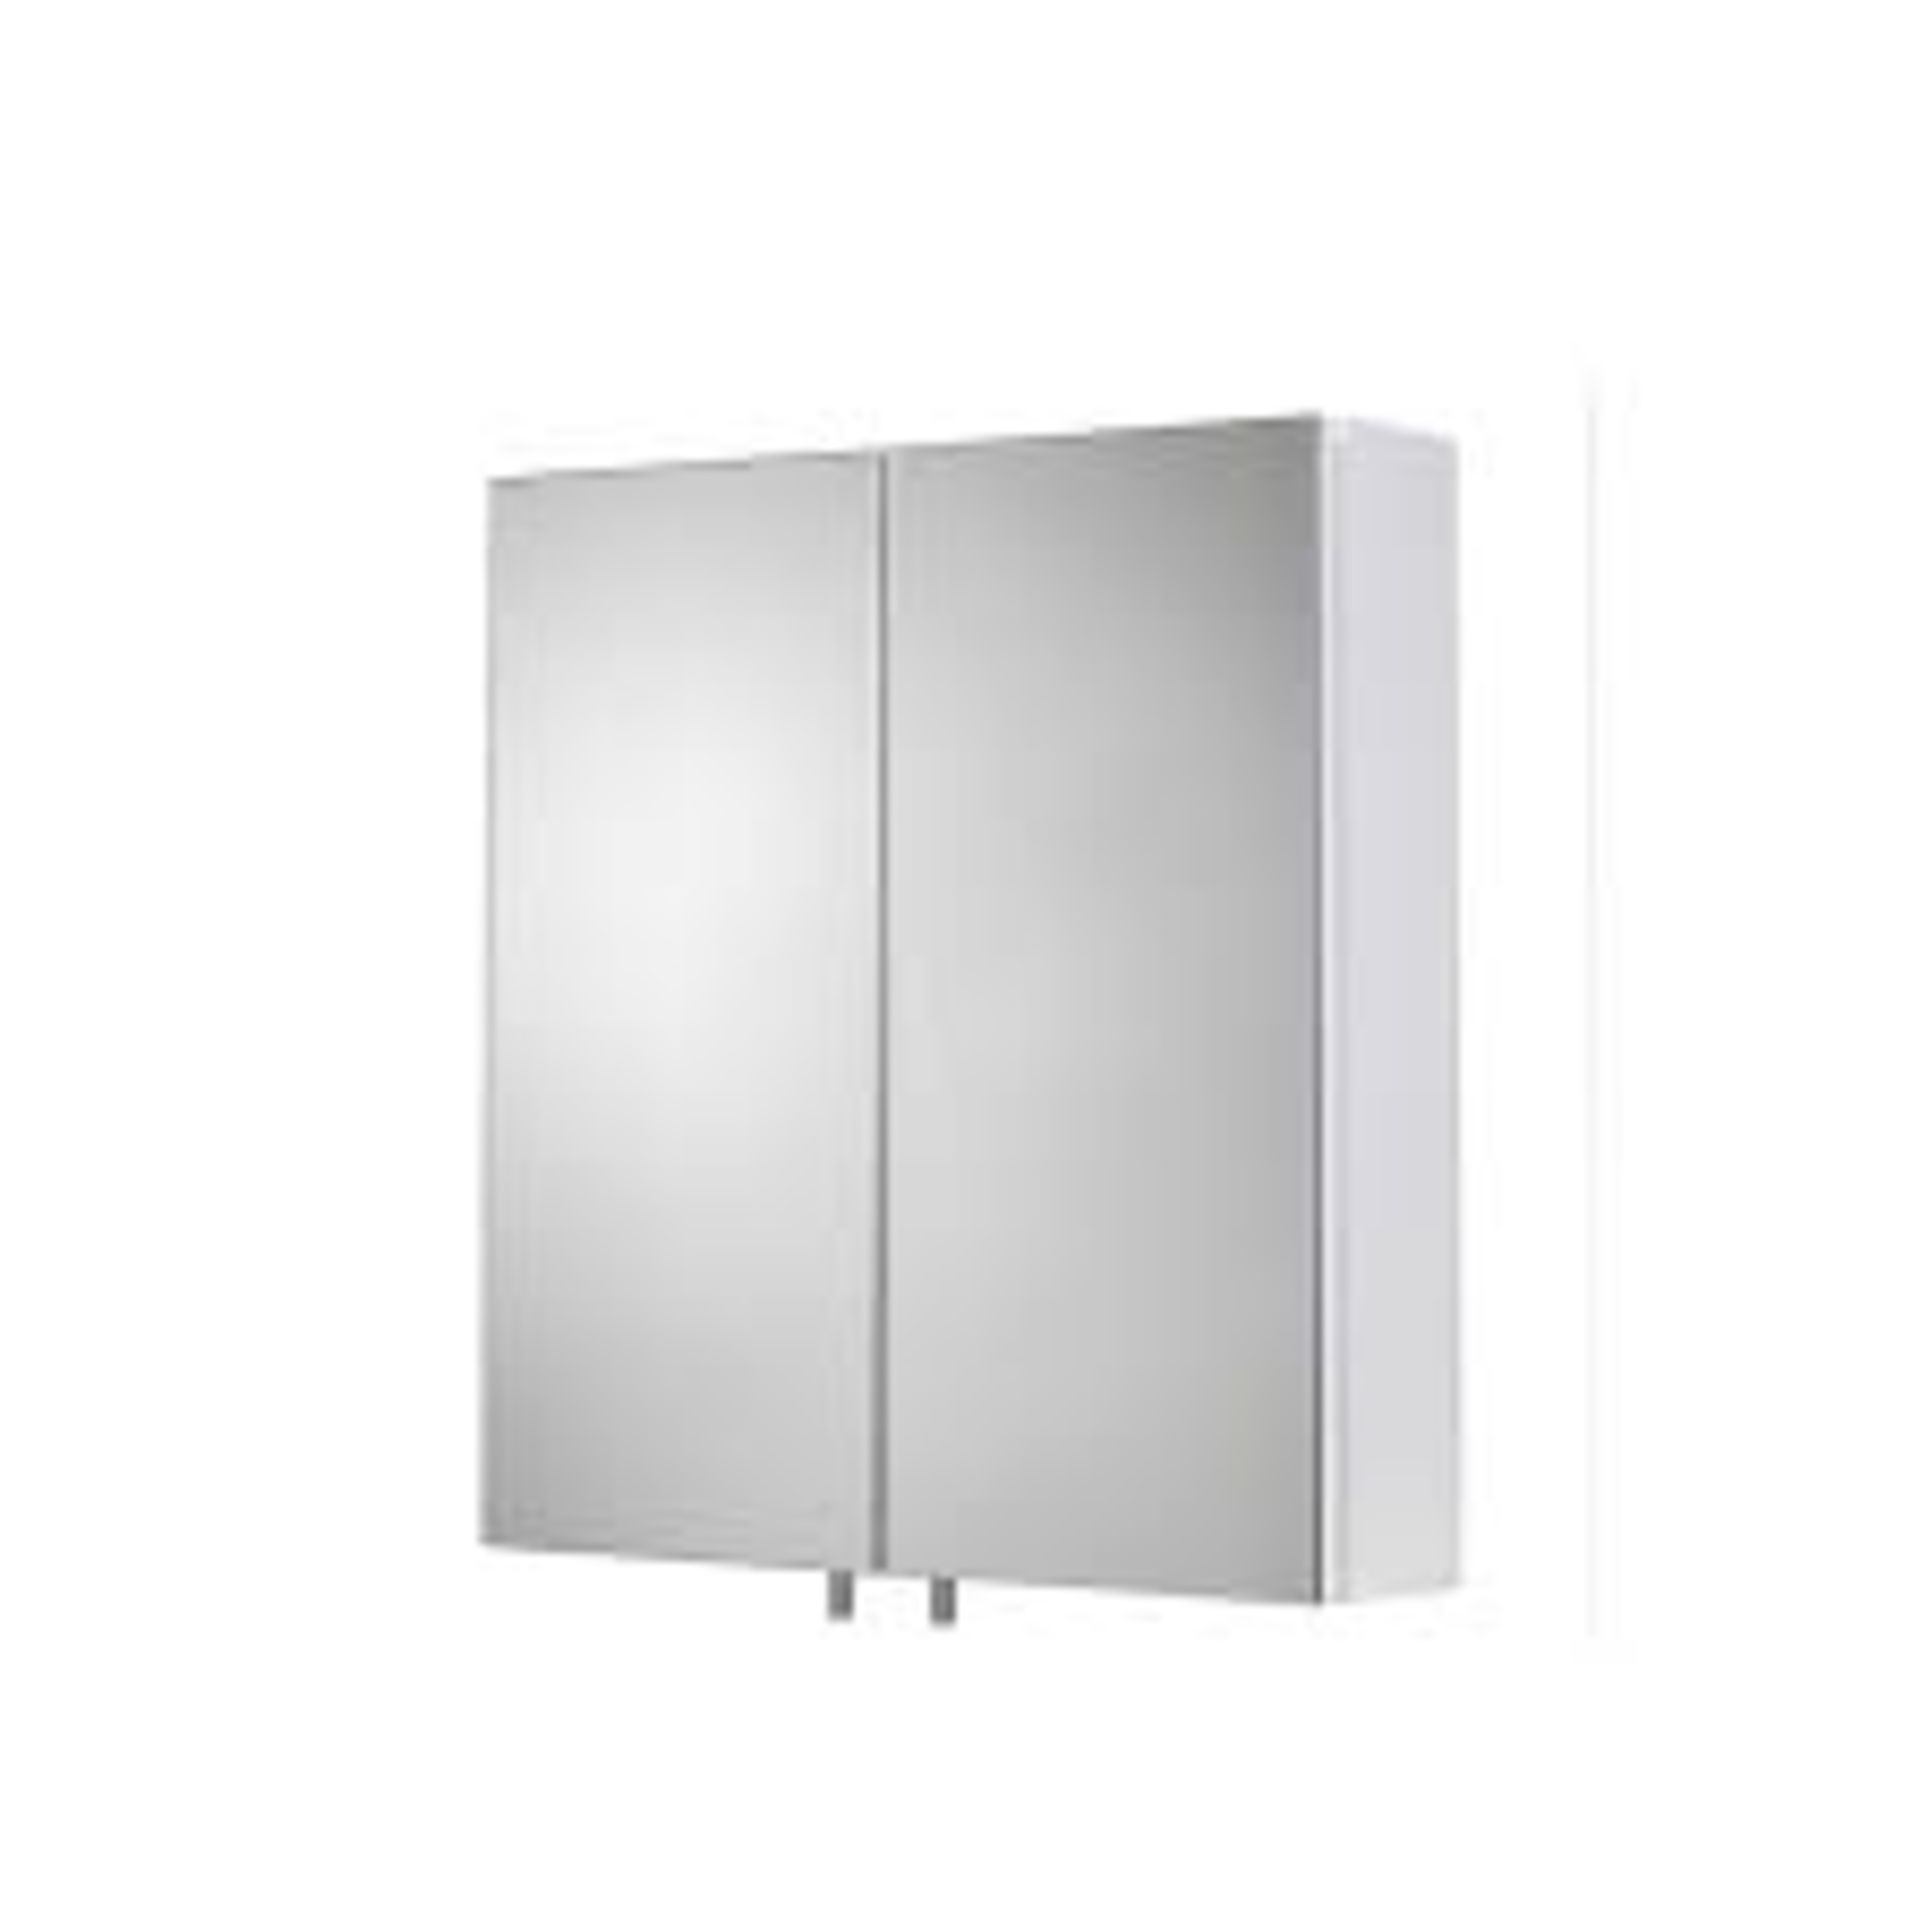 Croydex Cullen Gloss White Wall-mounted Double Bathroom Cabinet. - ER48